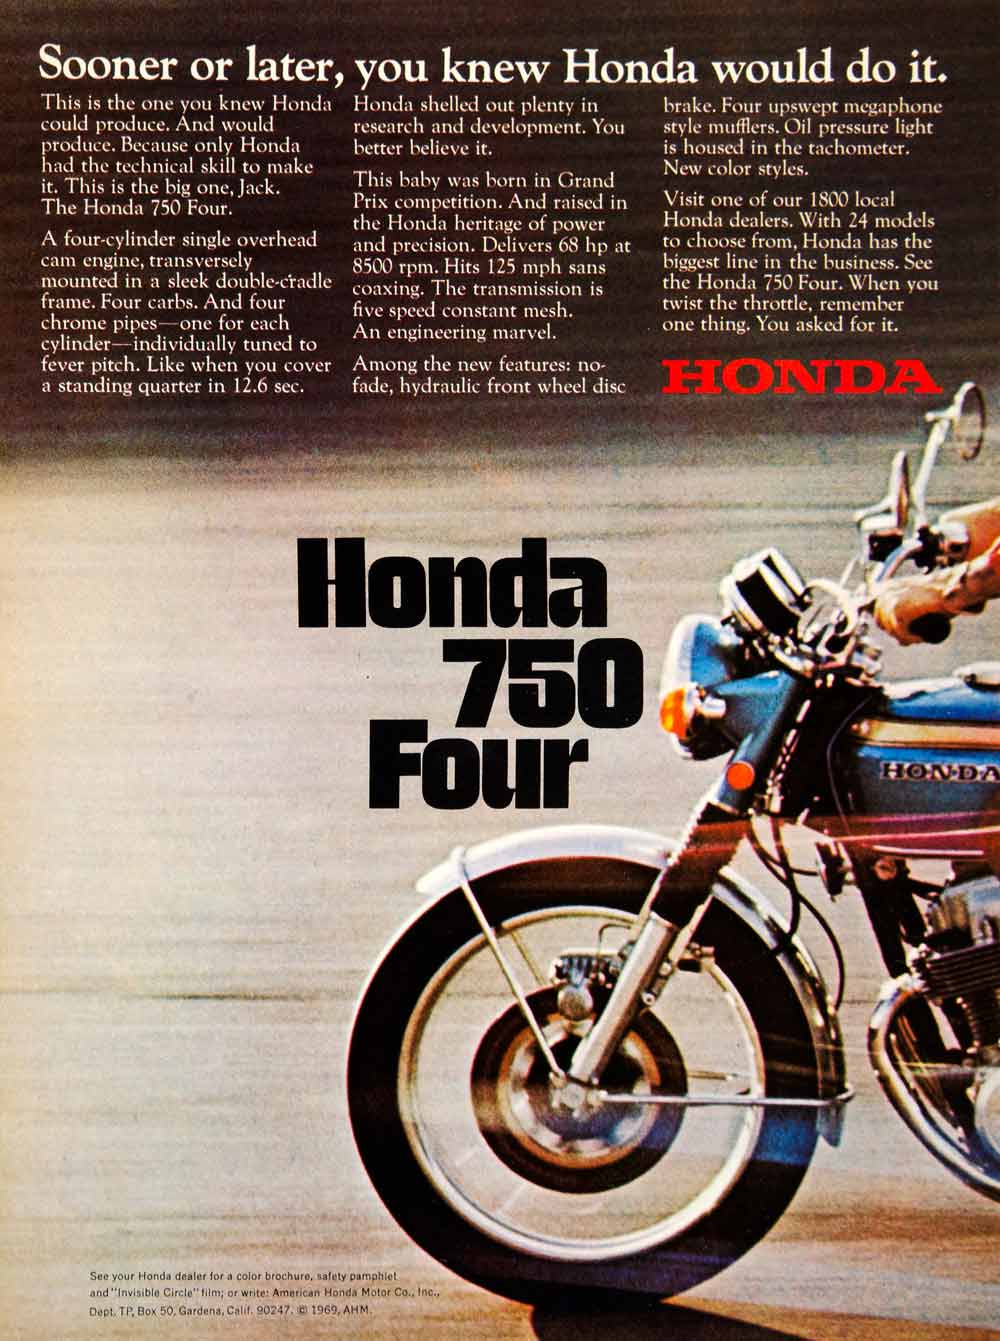 1969 Ads Honda 750 Four Motorcycle 4-Cylinder Single OHV Engine 5-Speed YCD7